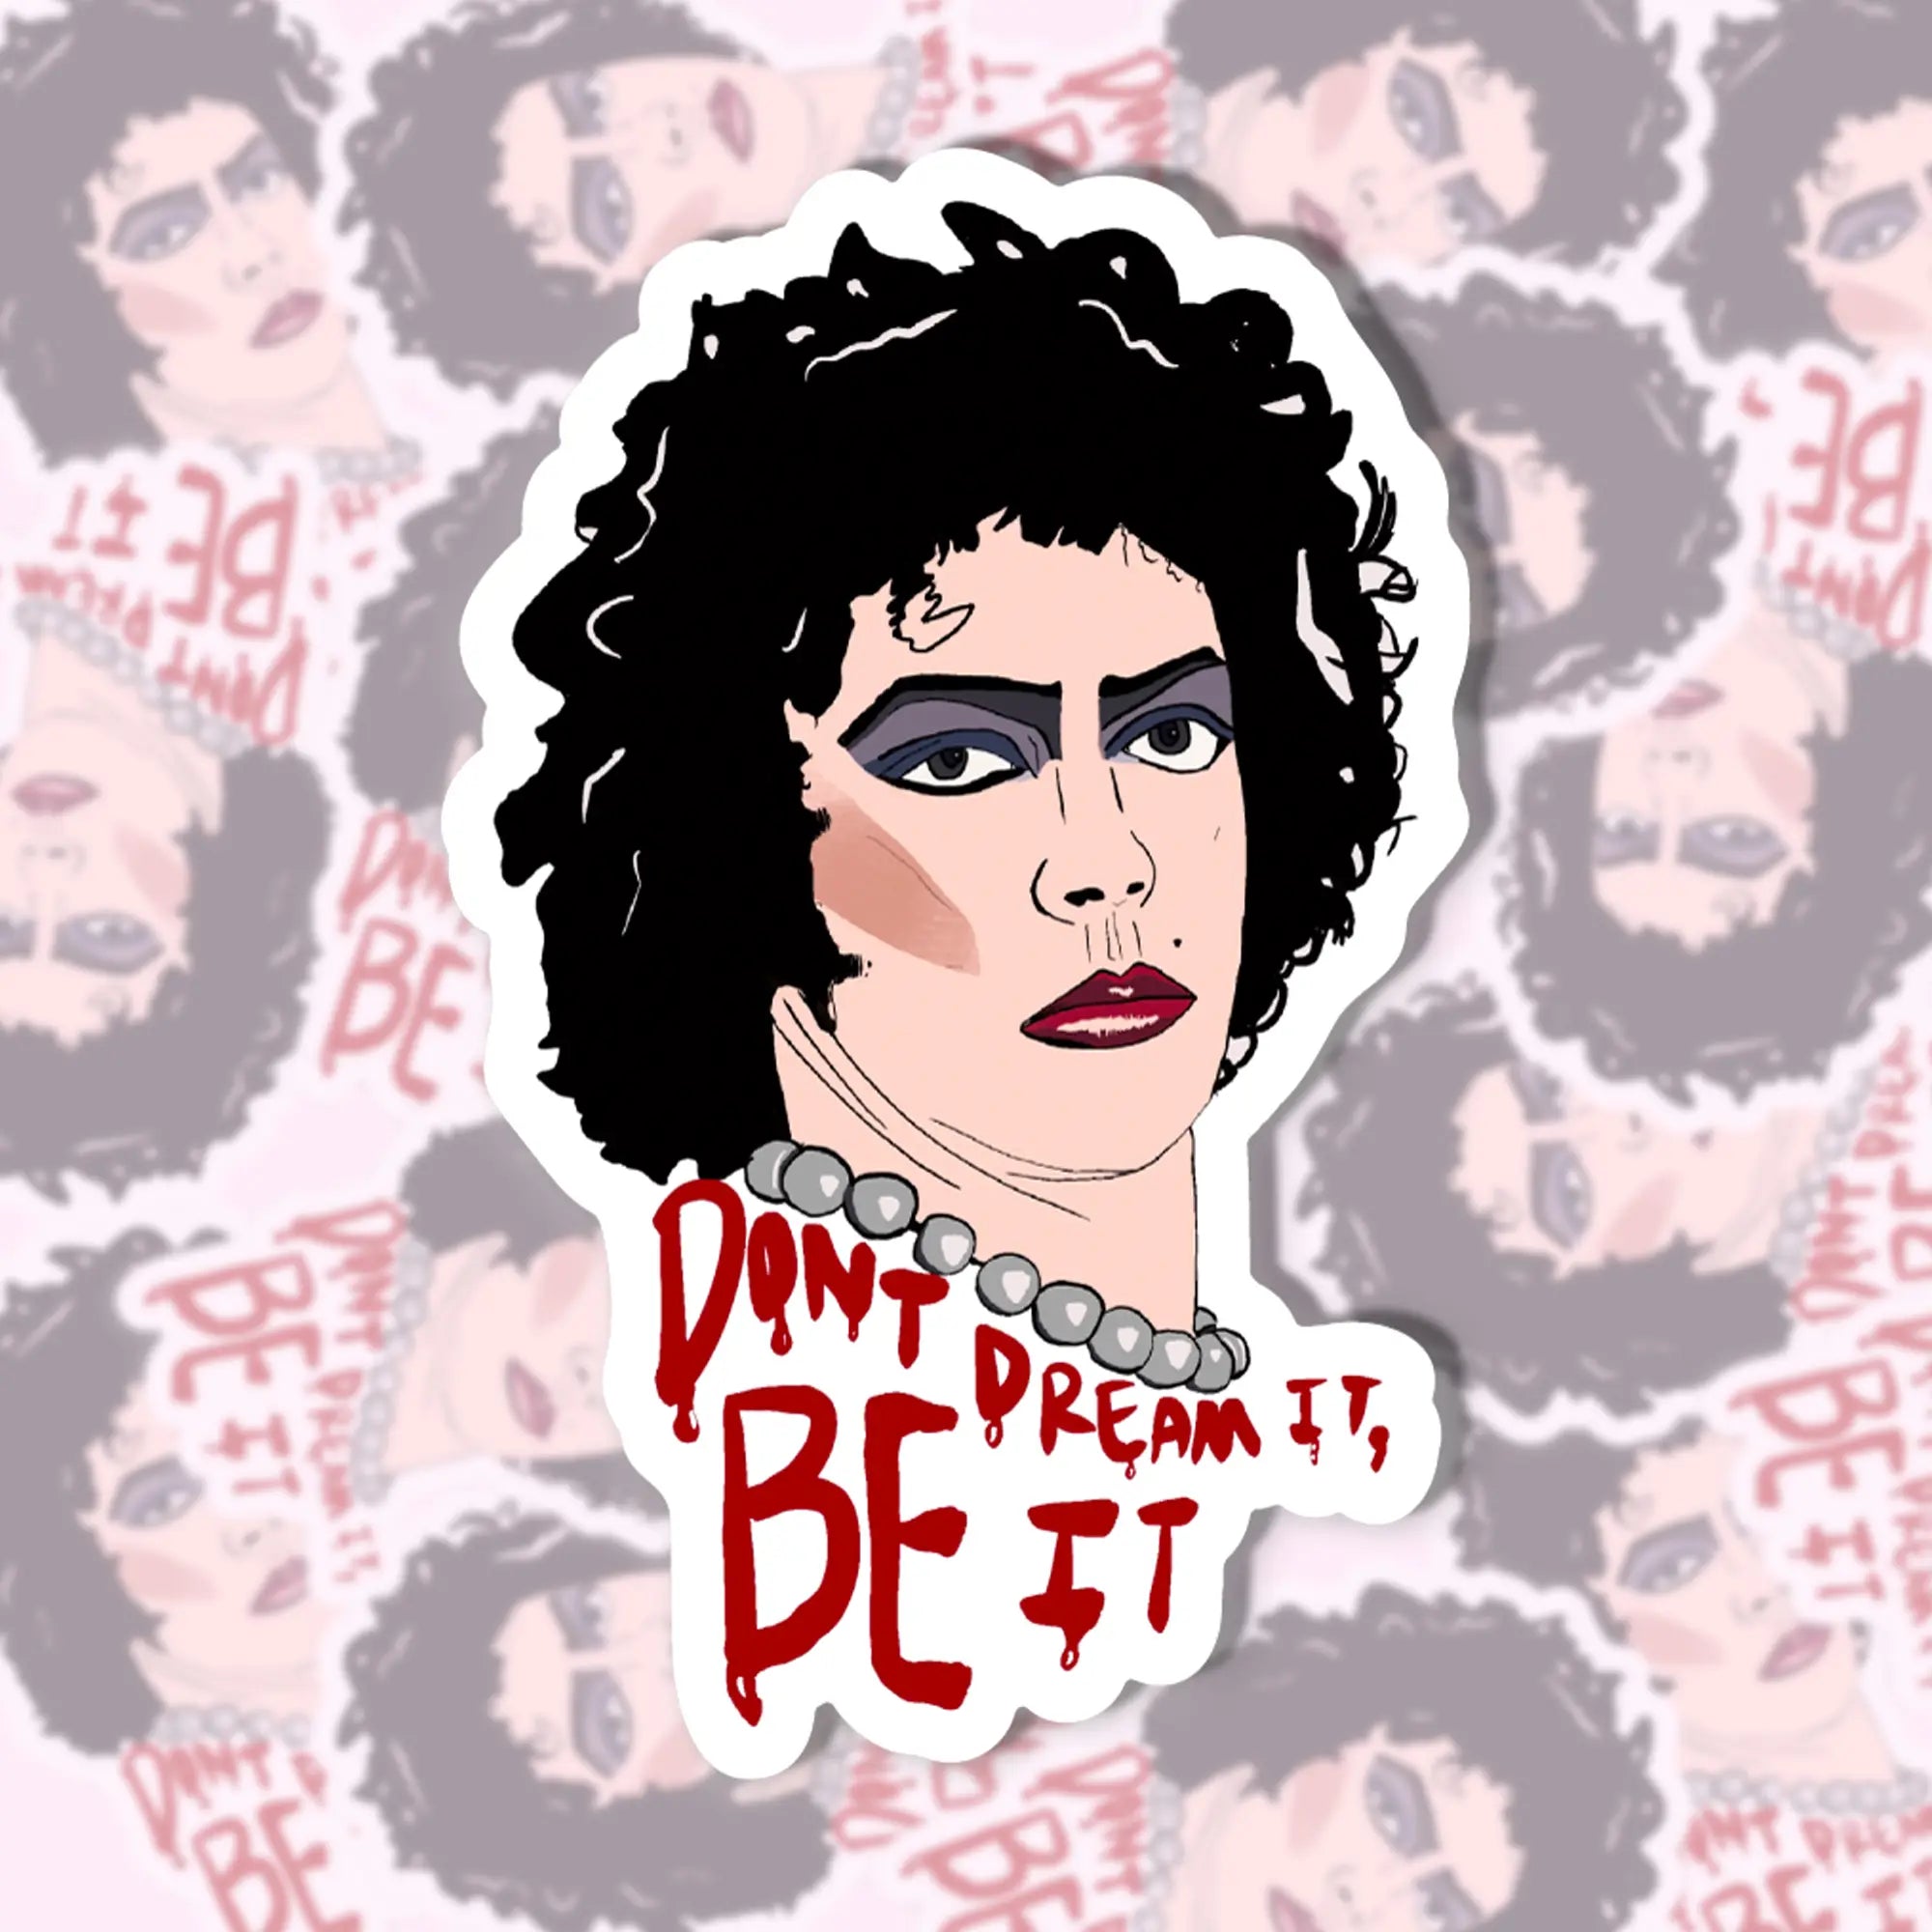 A die cut magnet of Tim Curry as Dr. Frankenfurter in The Rocky Horror Picture Show with the words “Don’t dream it, be it” written in drippy red font below